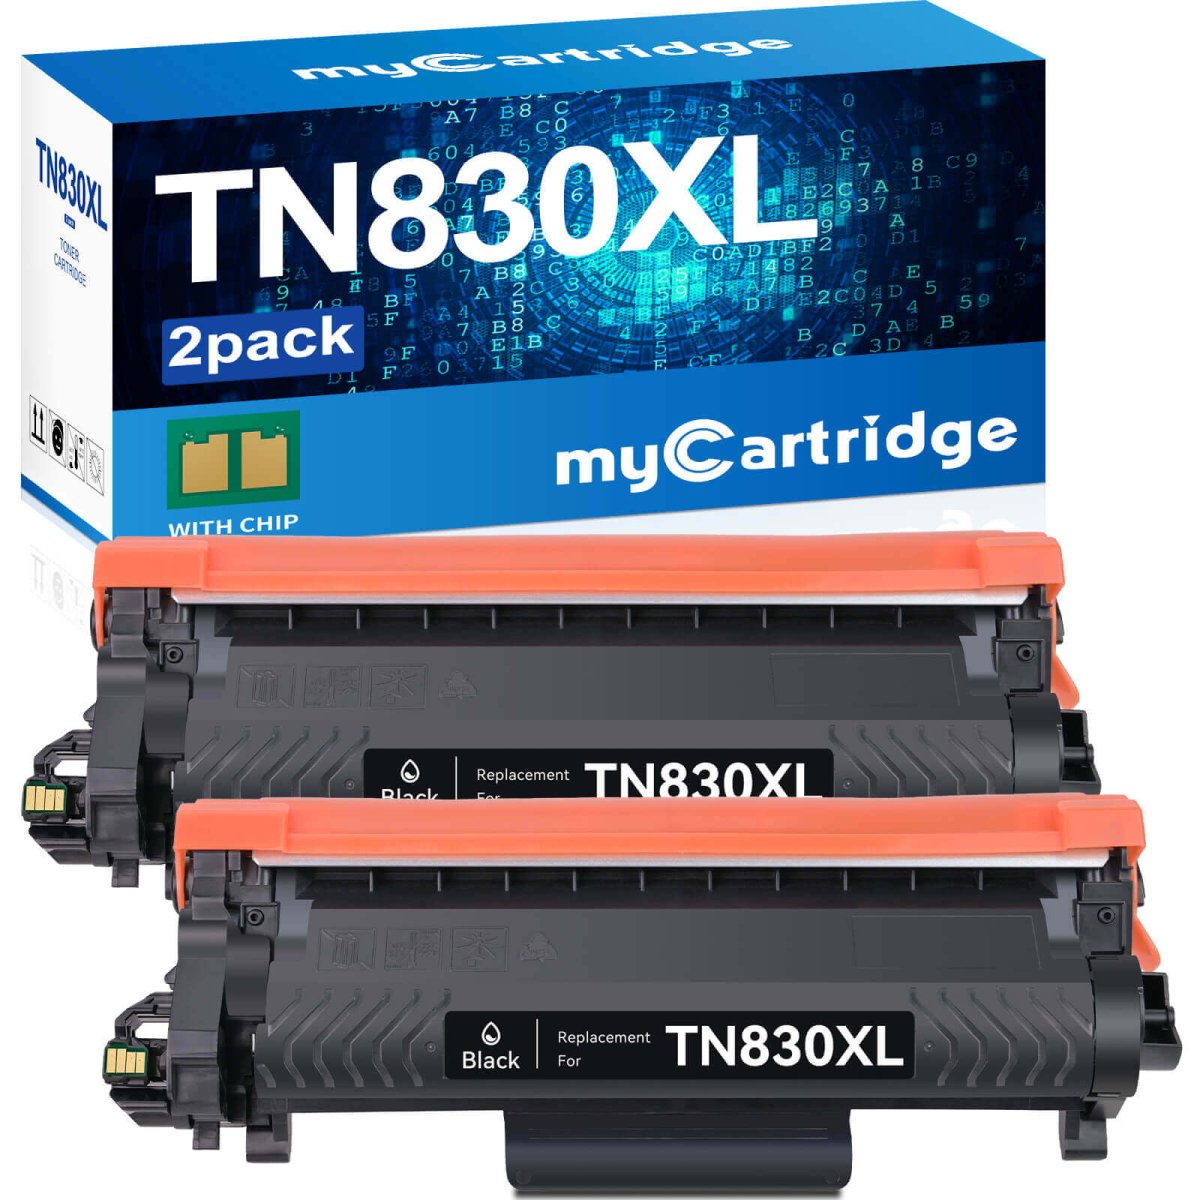 Compatible Brother TN830XL Toner Cartridge High Yield (Black, 1 Pack) - Linford Office:Printer Ink & Toner Cartridge